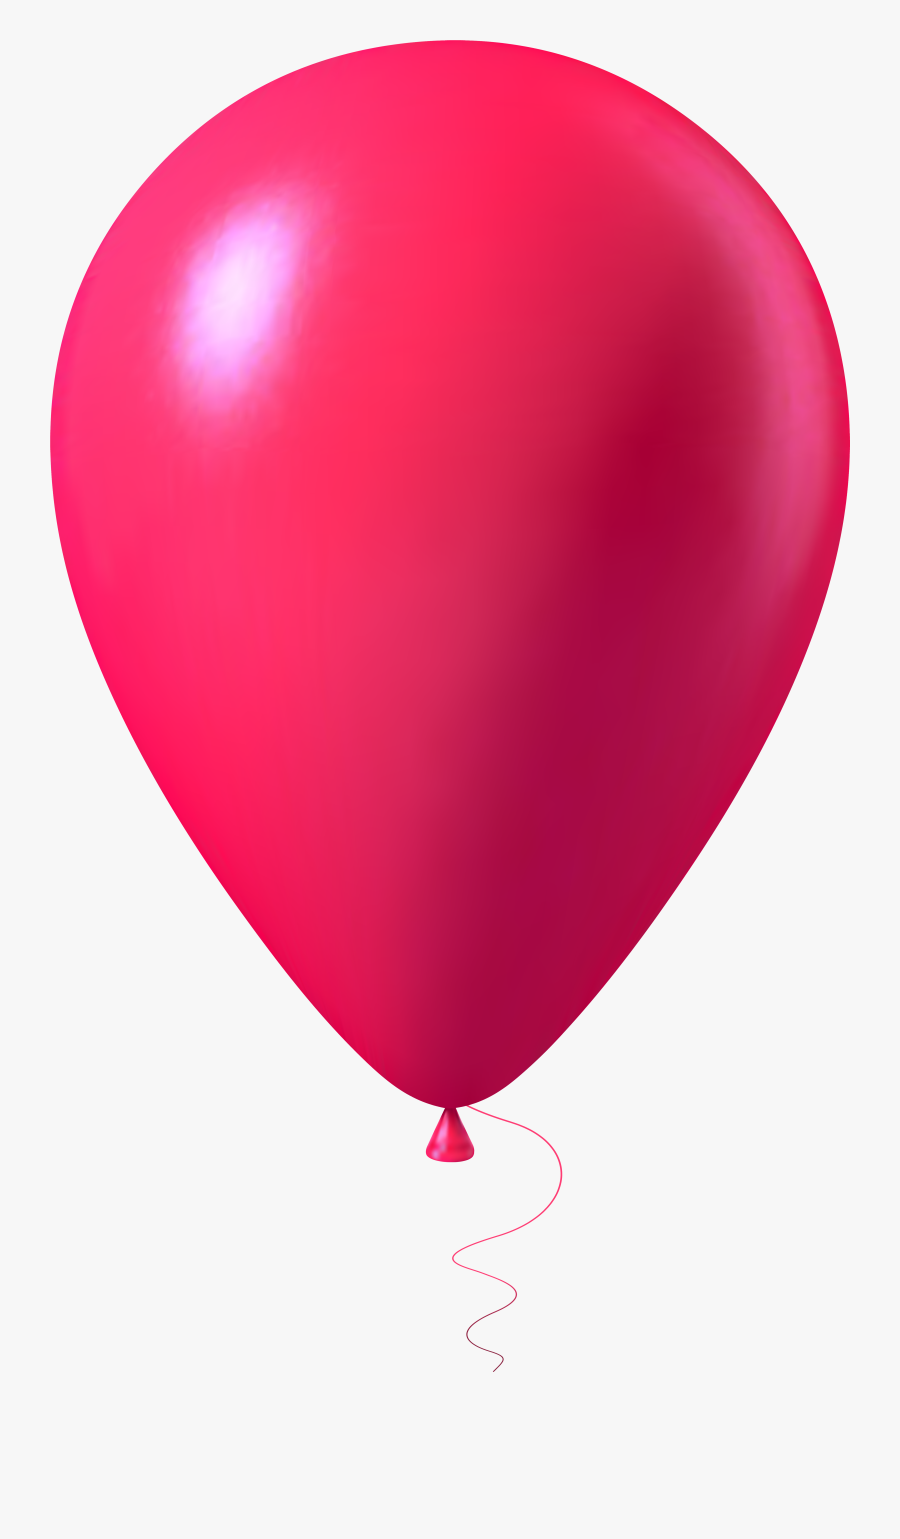 Balloon Png Image Gallery - Balloon, Transparent Clipart